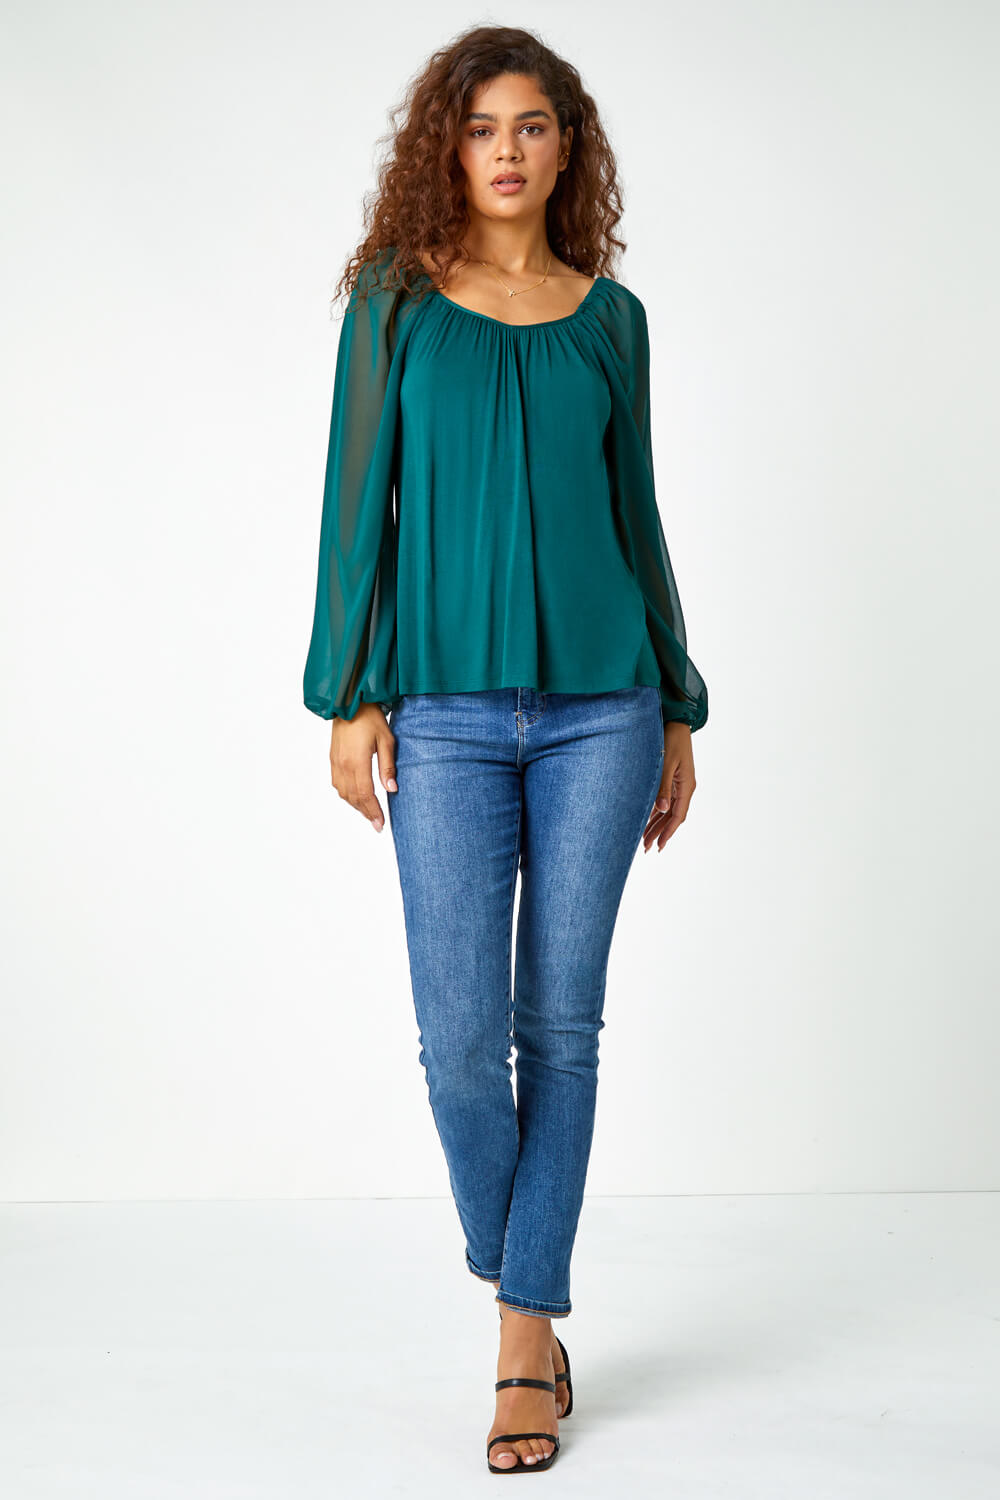 Green Contrast Chiffon Sleeve Stretch Top, Image 2 of 5